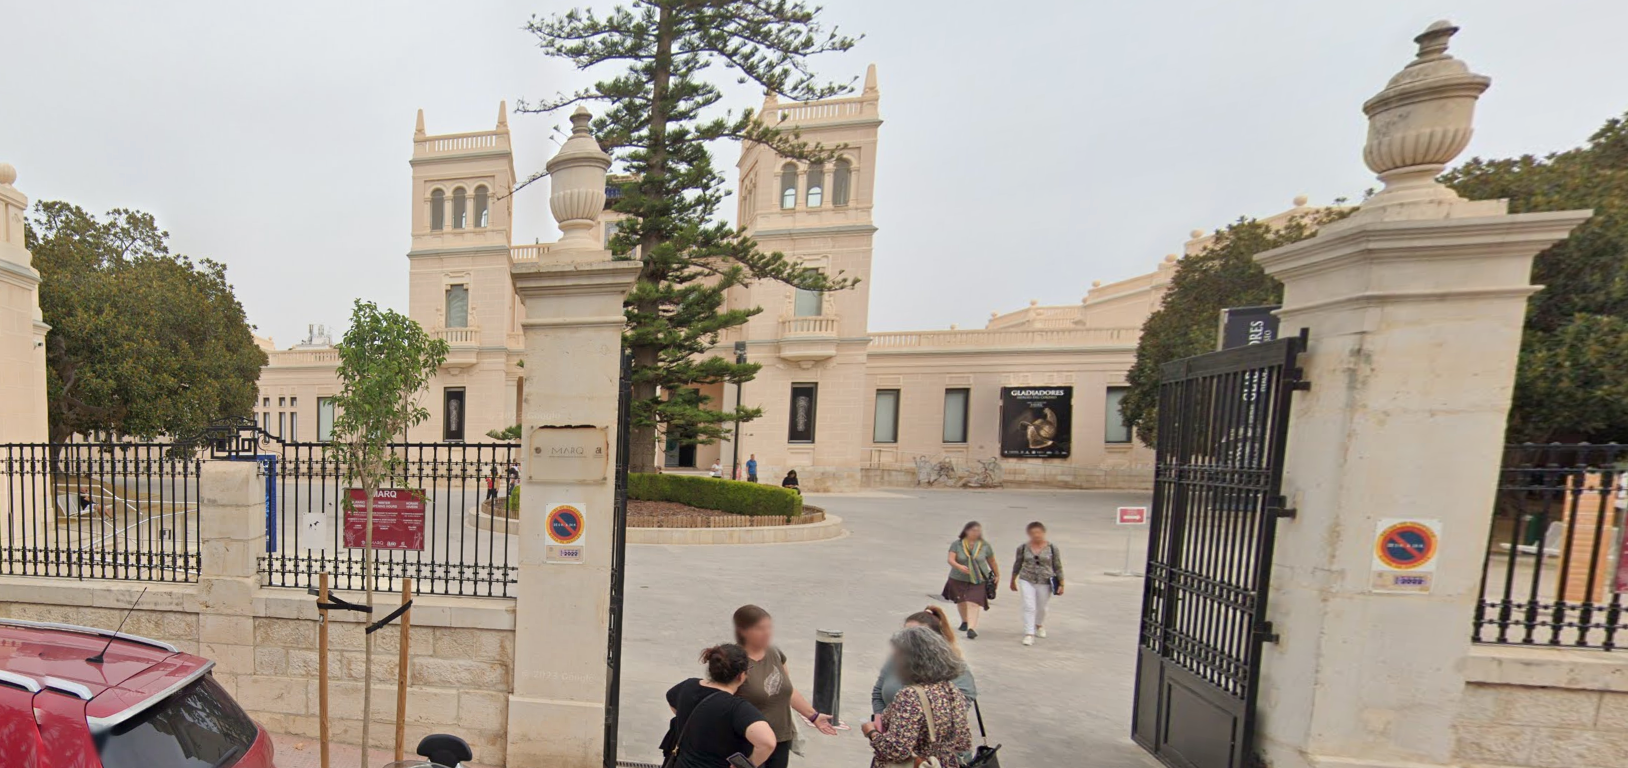 Archaeological Museum of Alicante by Google Earth